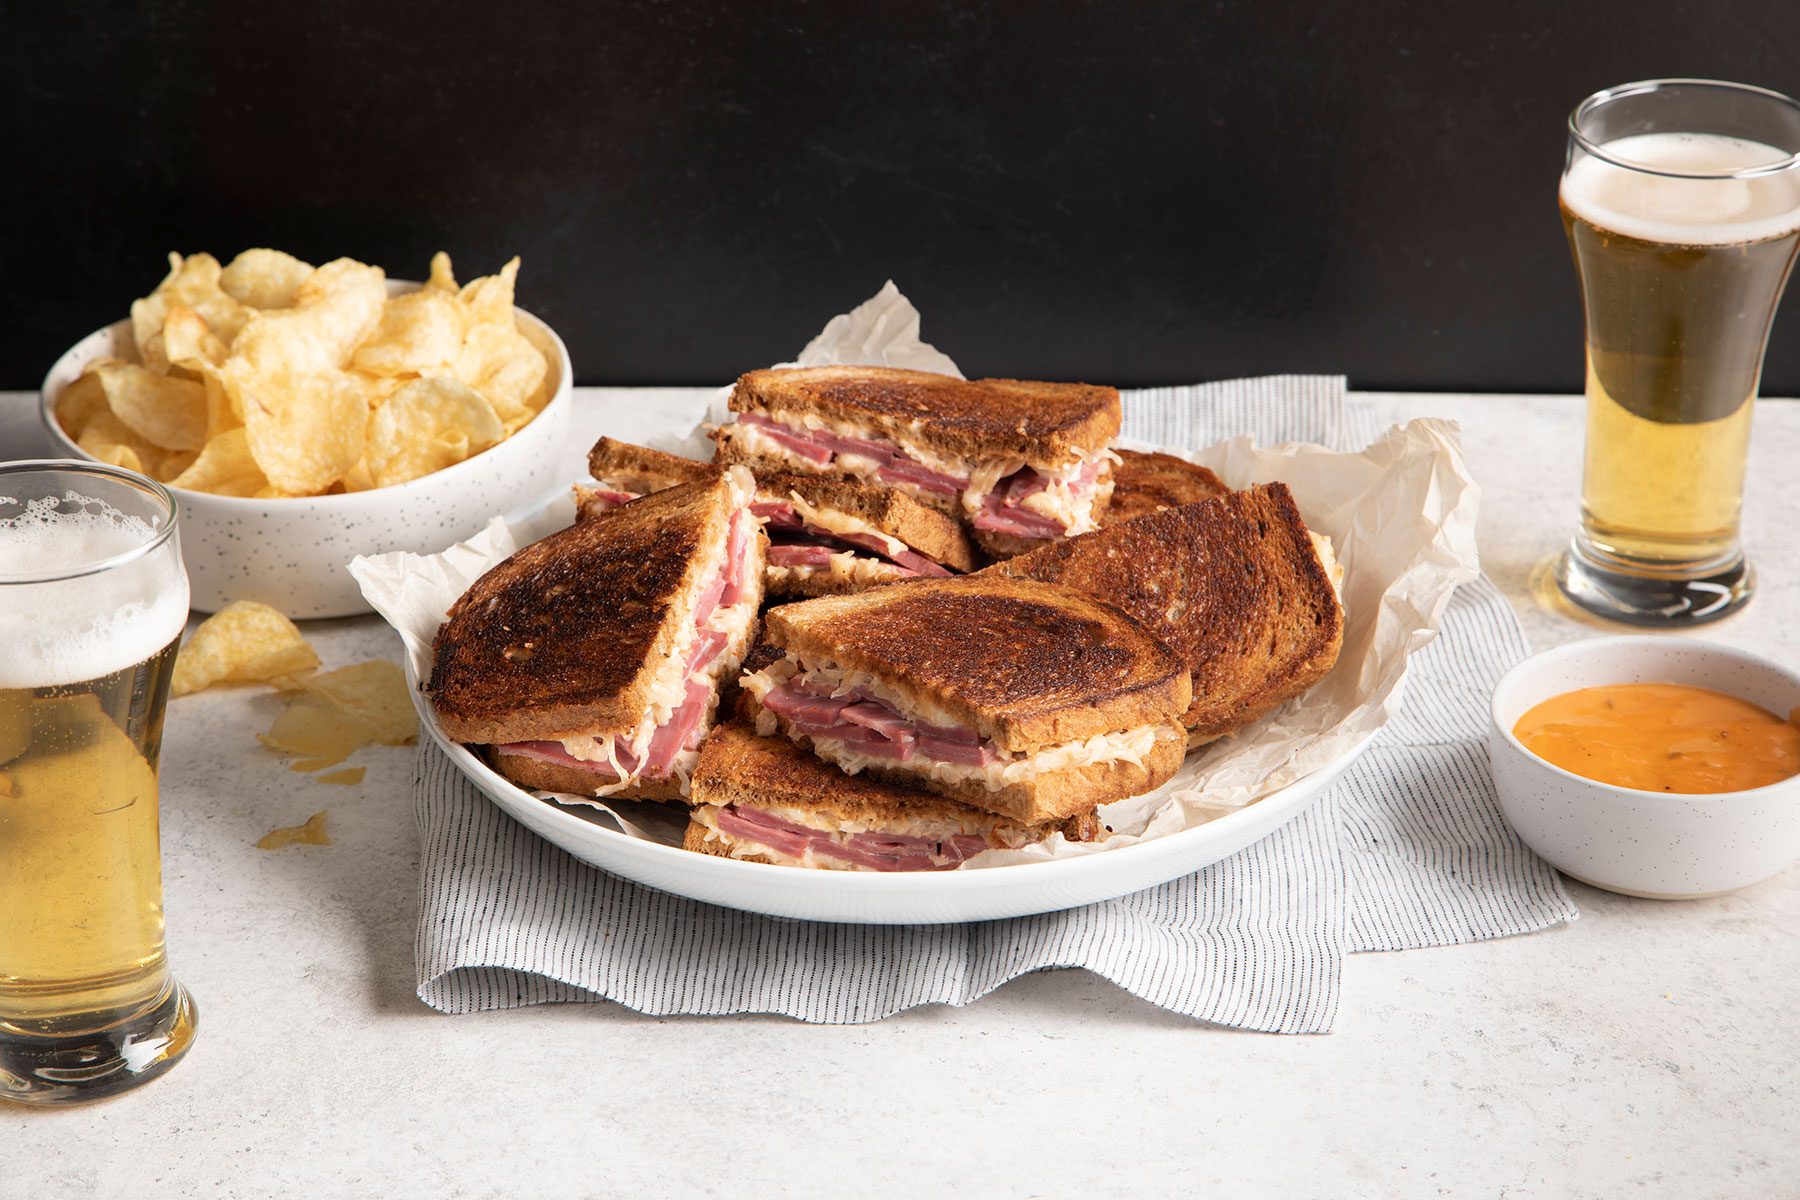 Corned Beef Sandwiches served with chips, dip and beverages